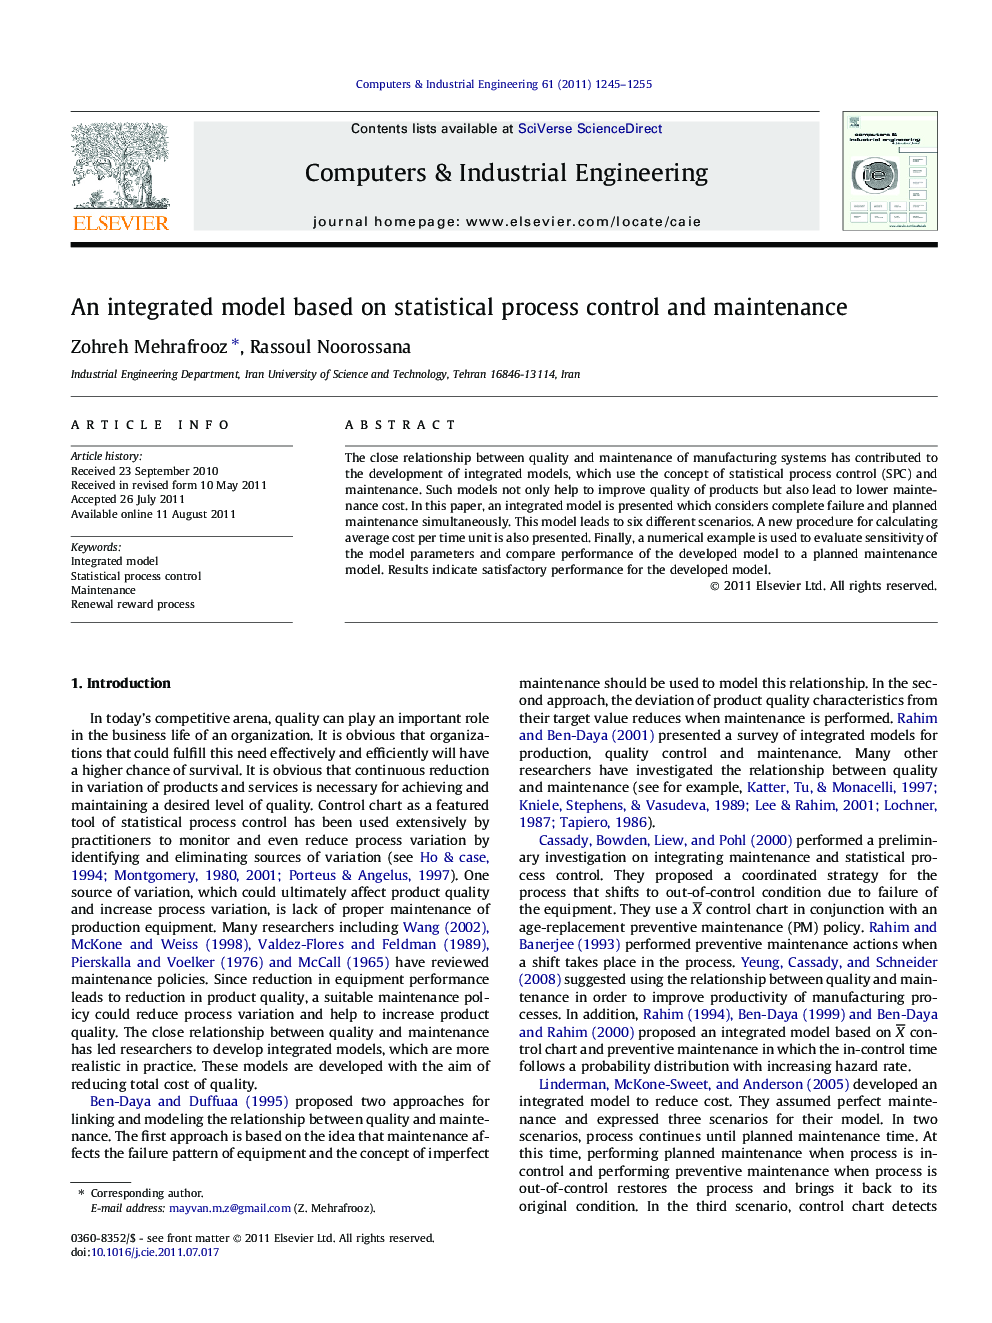 An integrated model based on statistical process control and maintenance